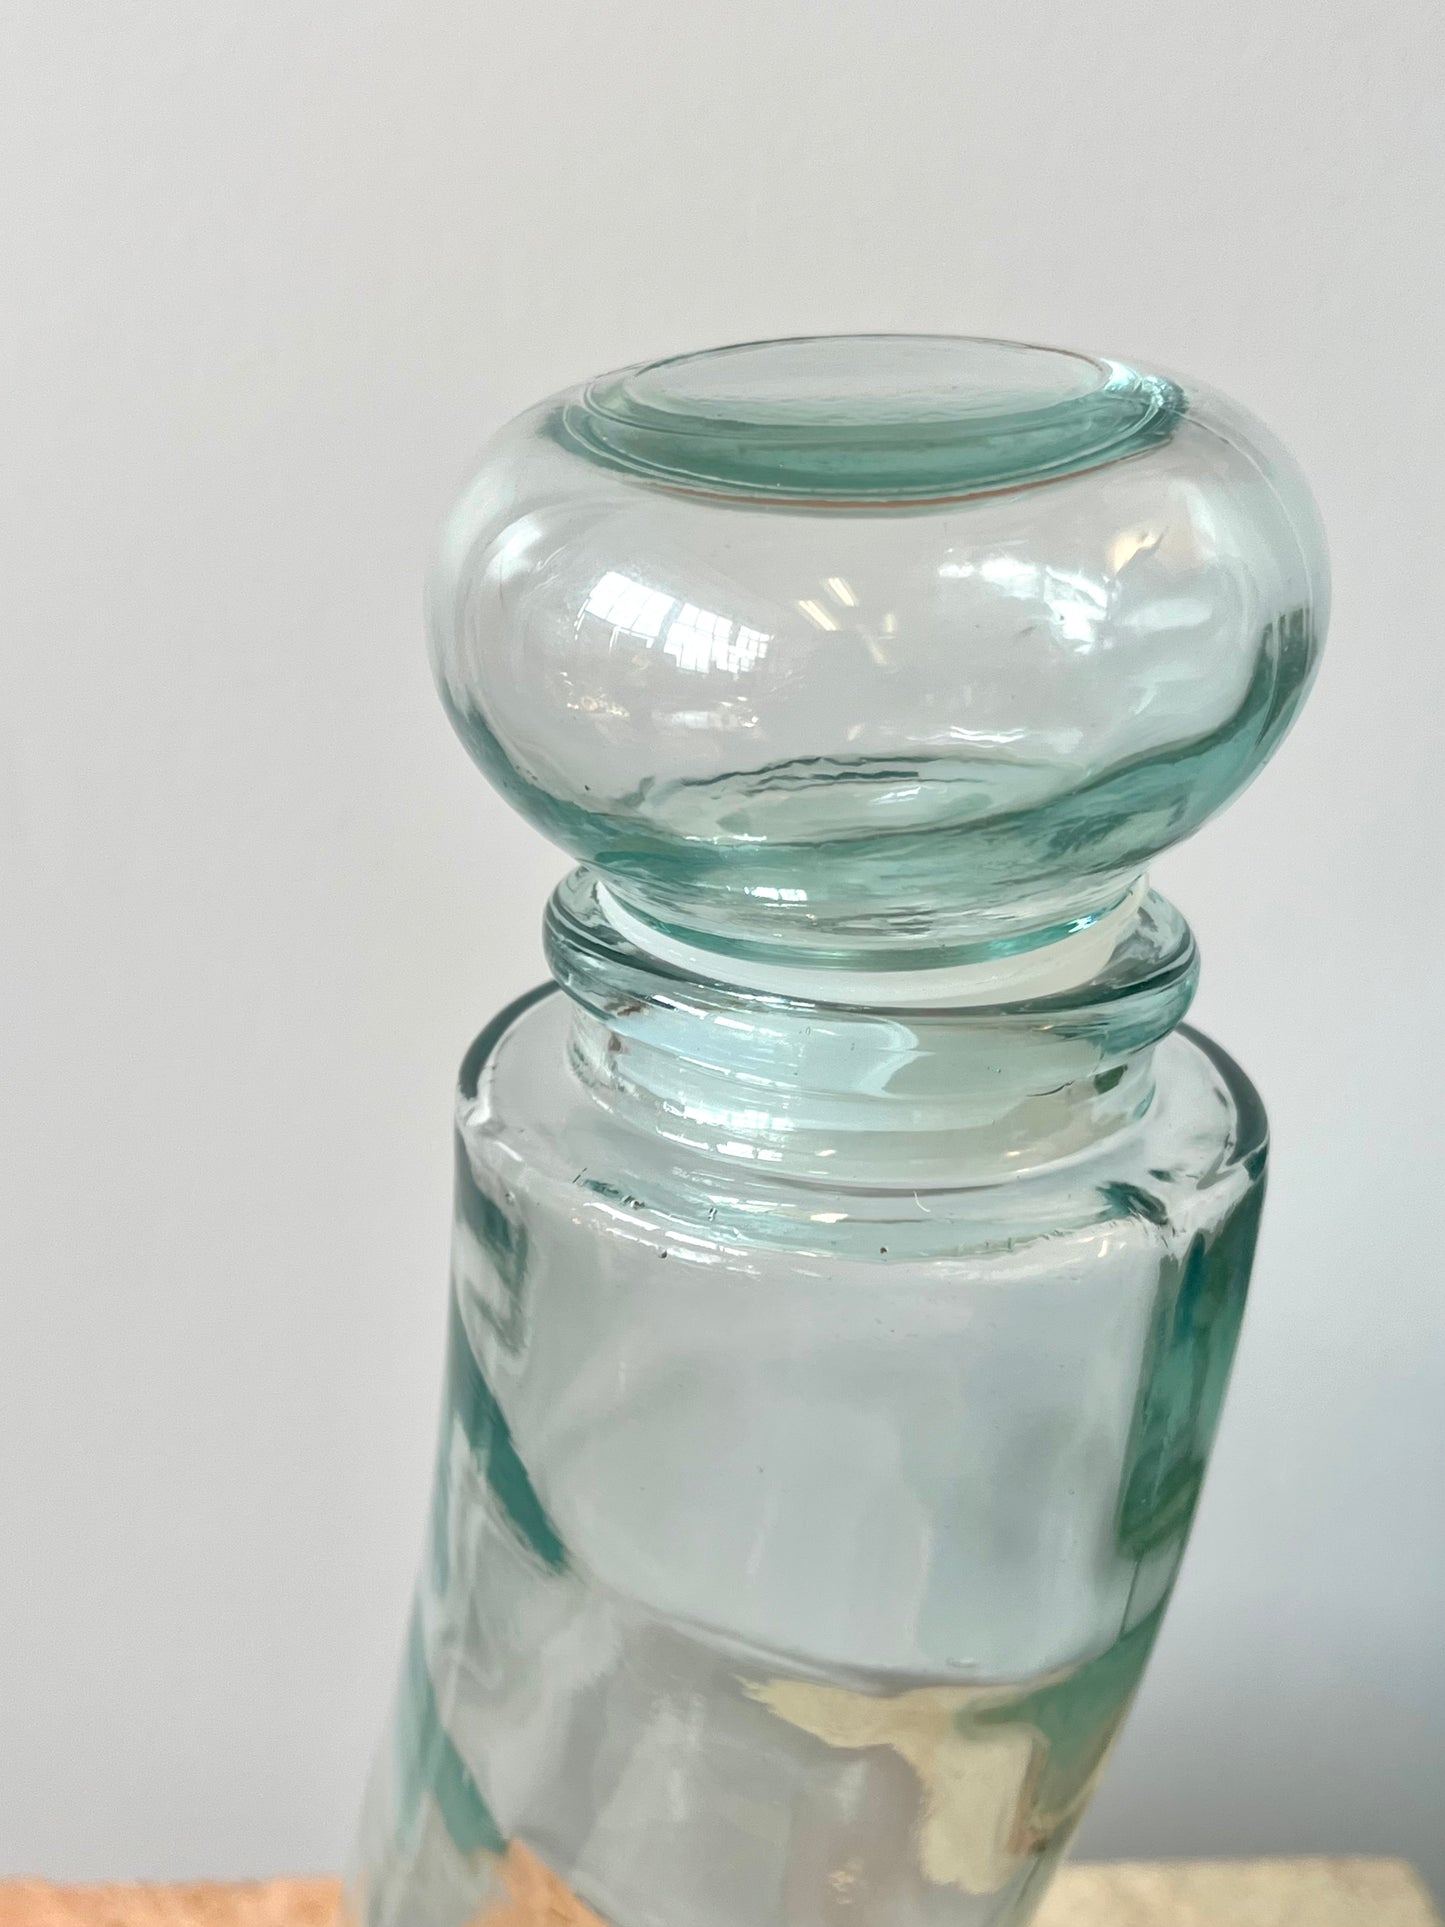 Vintage 2001 Curvy Glass Lidded Jar made in Italy